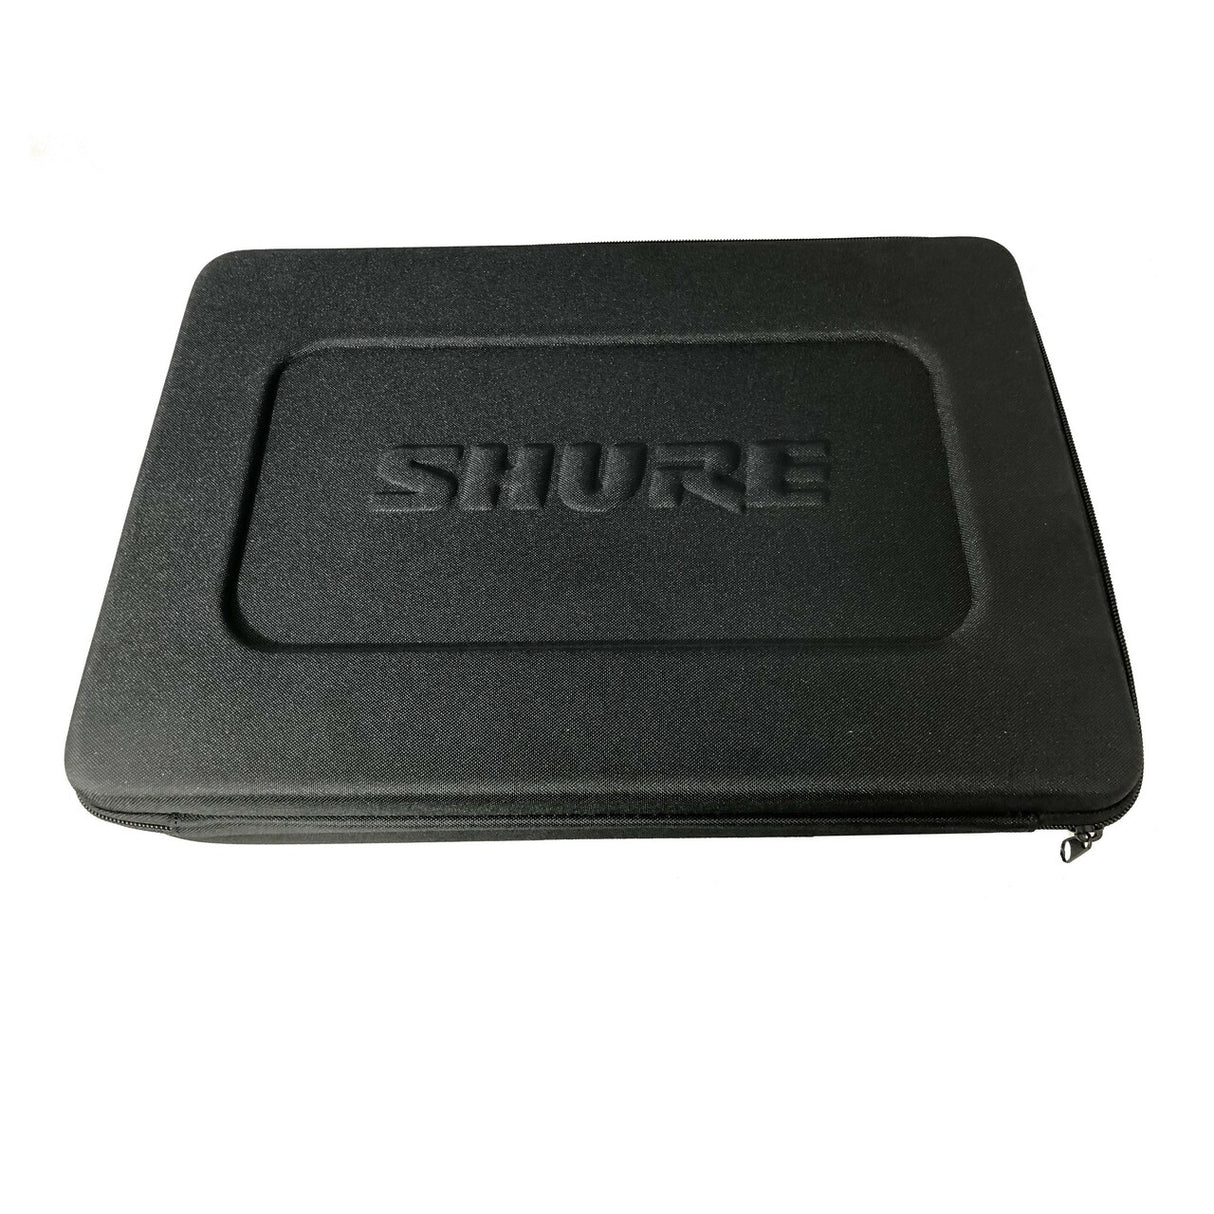 Shure 95D16526 Case for PGXD, GLXD and Some BLX Systems with Handheld Transmitters